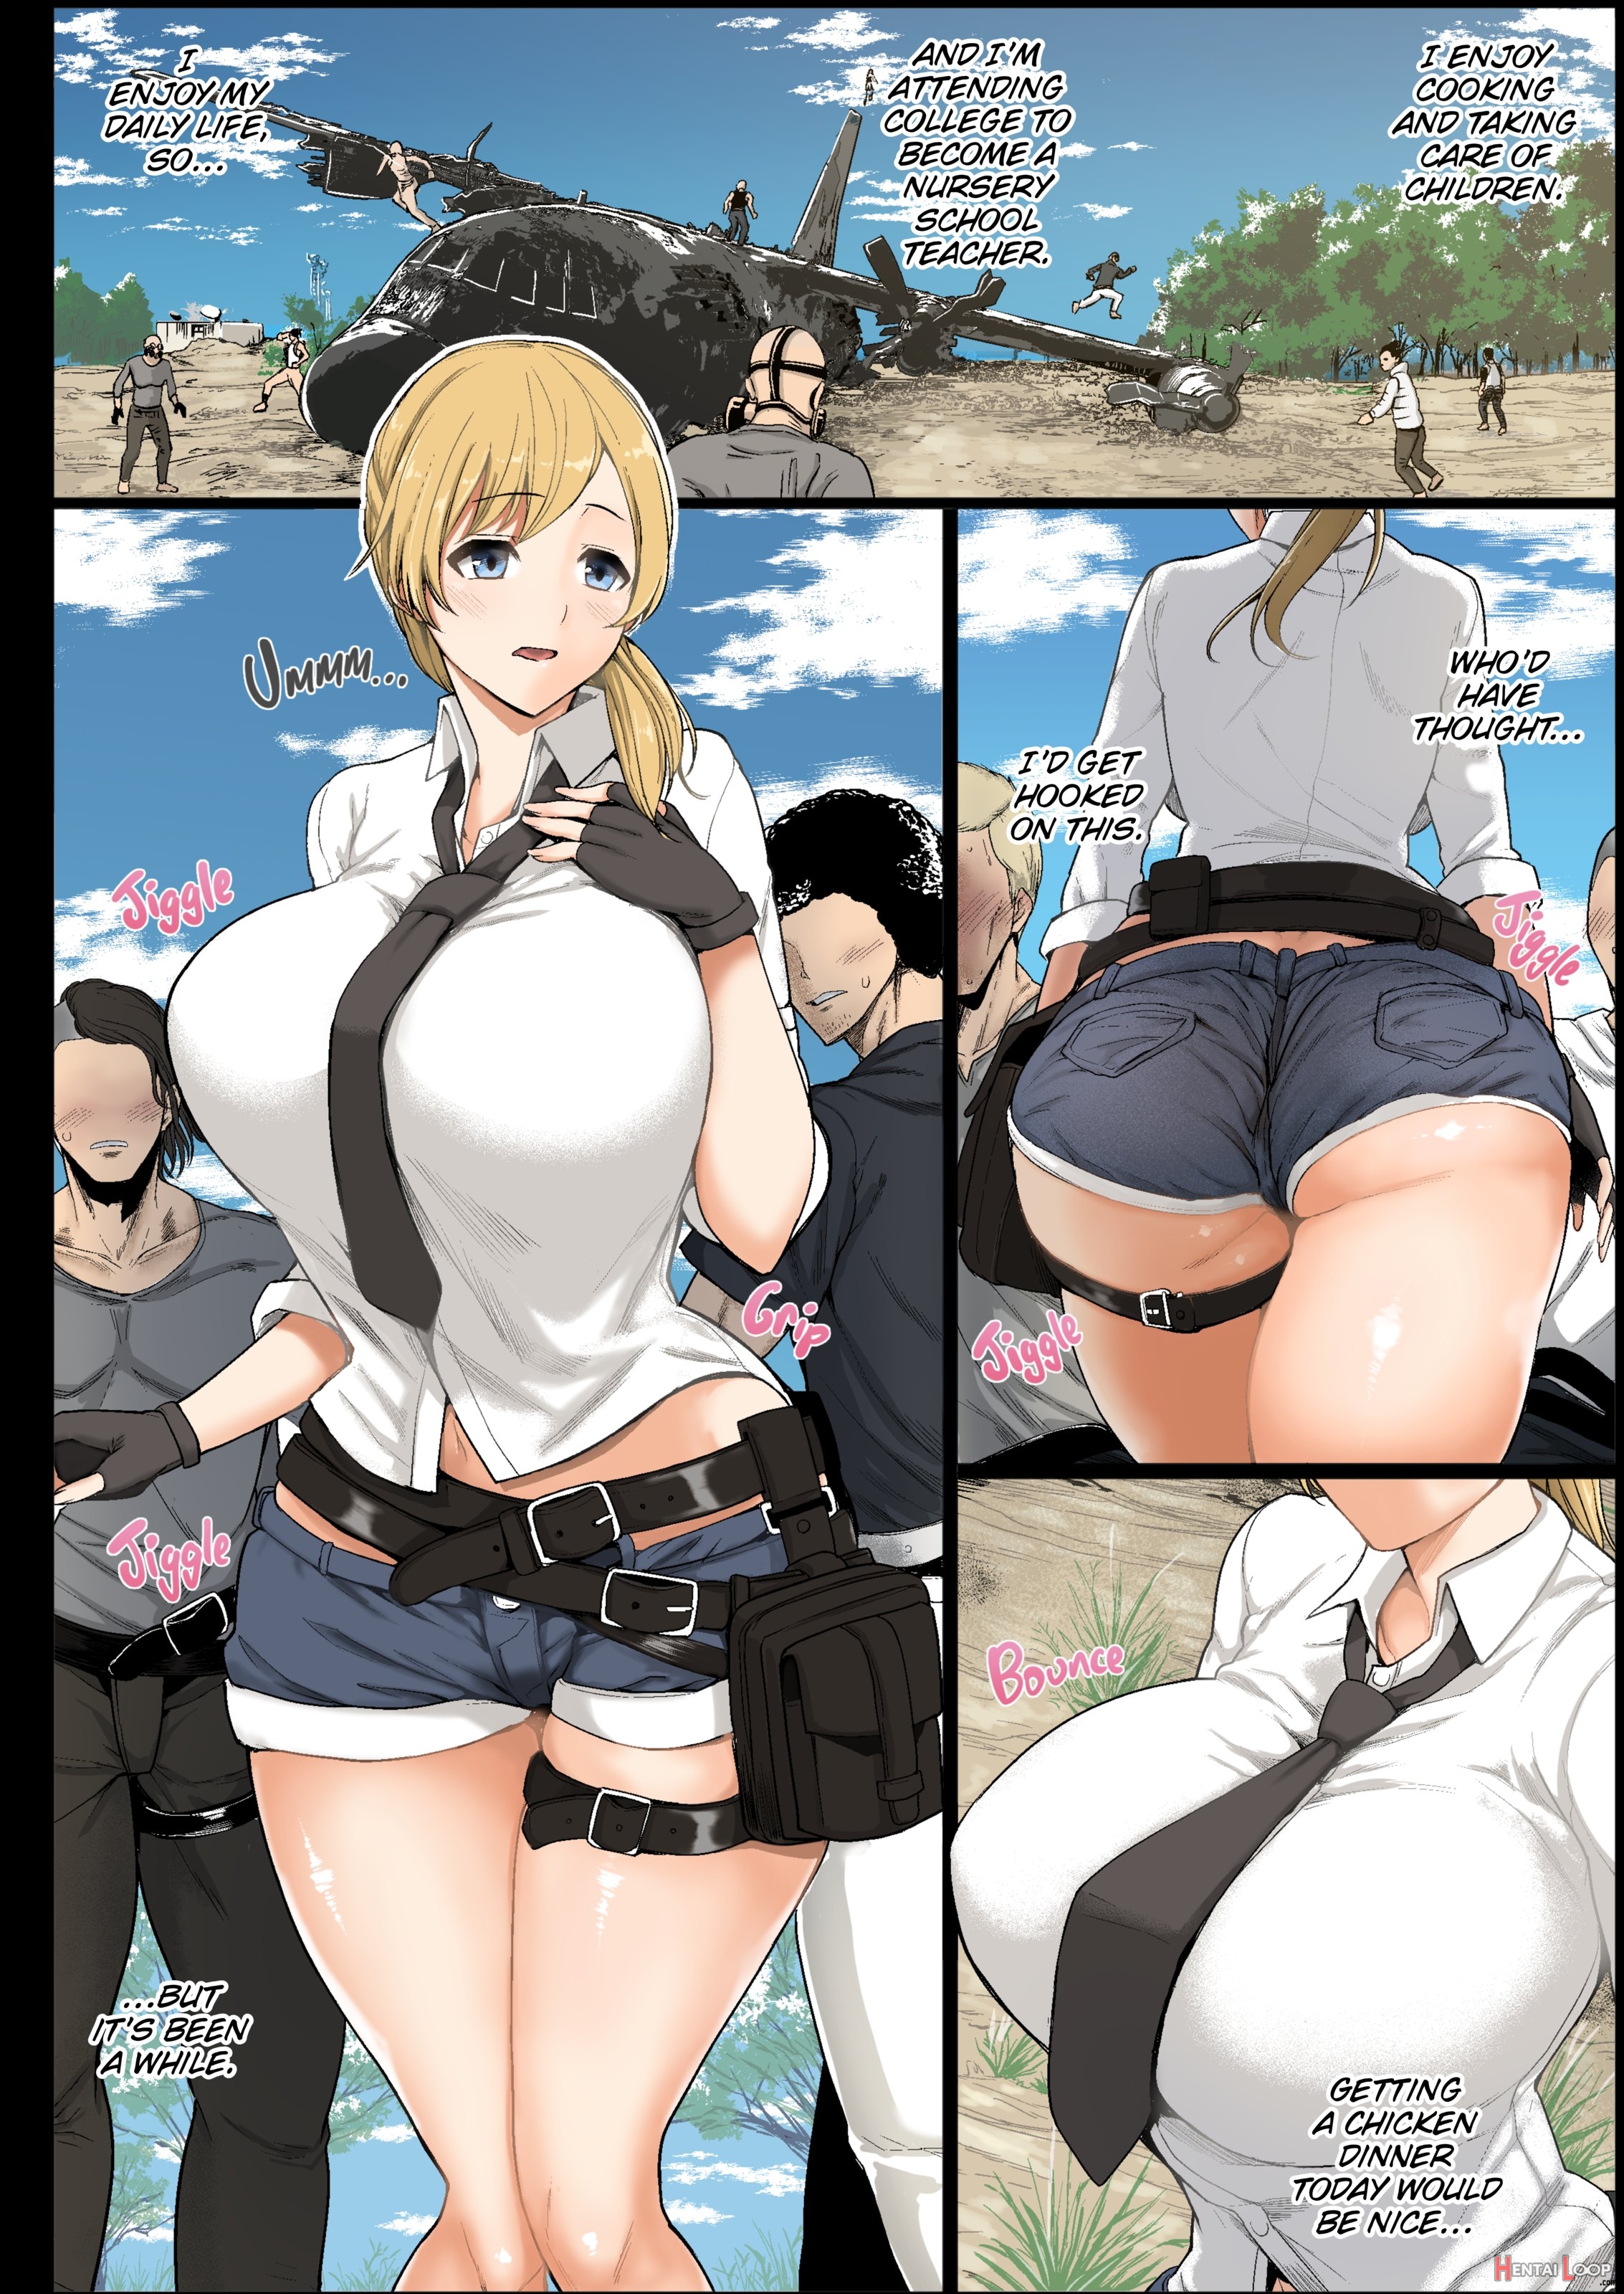 College Girl Wins A Lewd Chicken Dinner (by Shimantogawa)